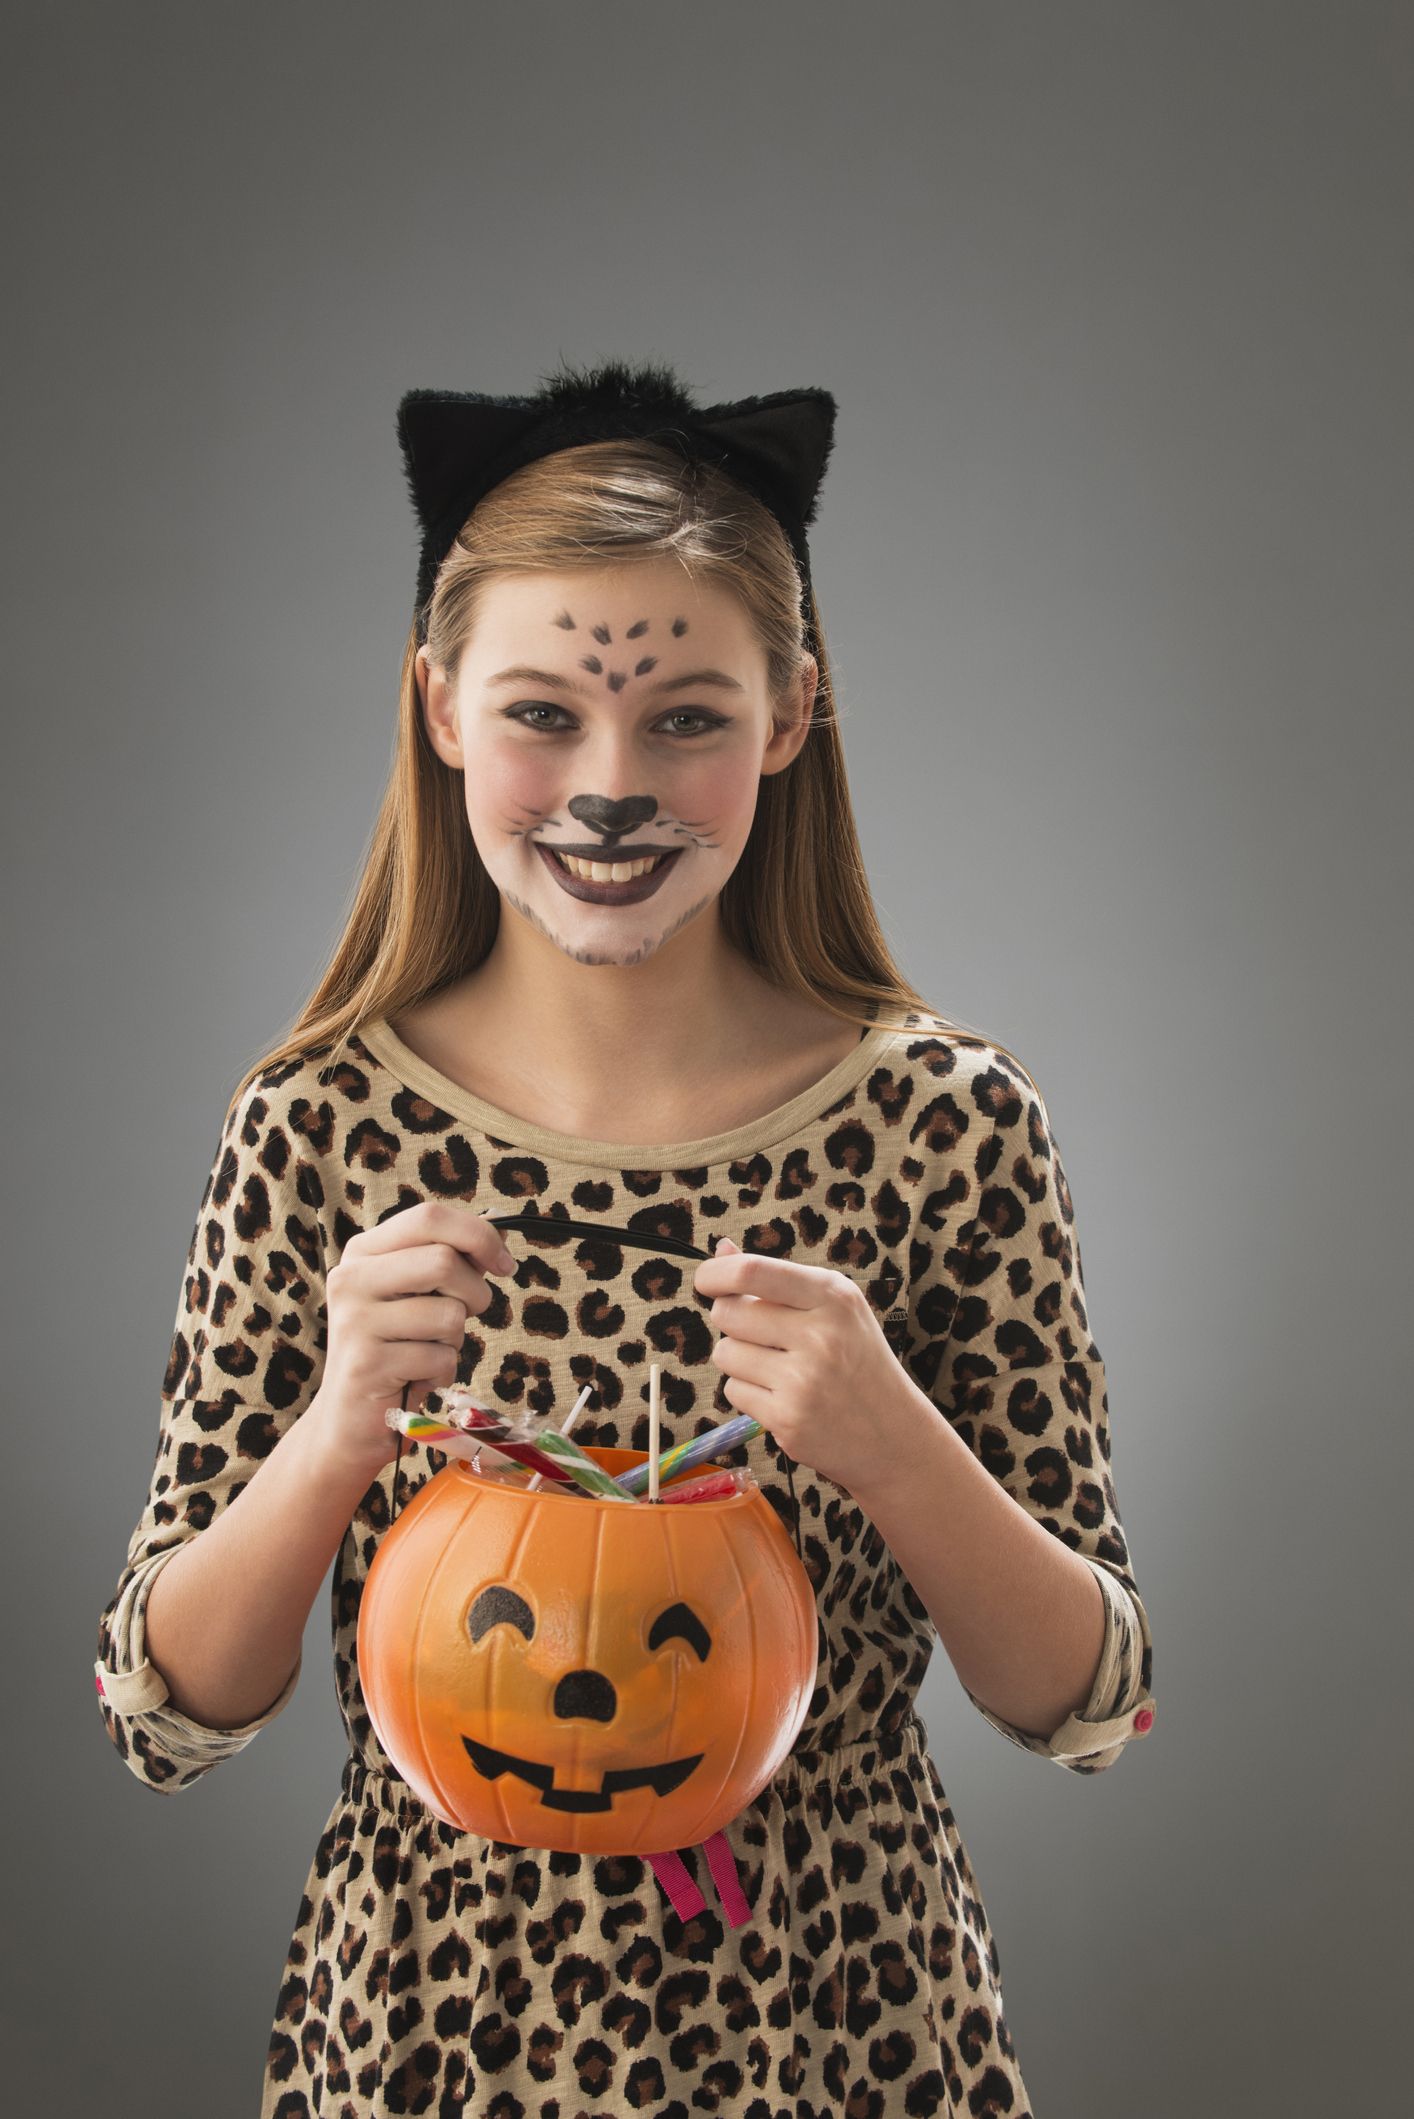 costumes for teens halloween homemade easy